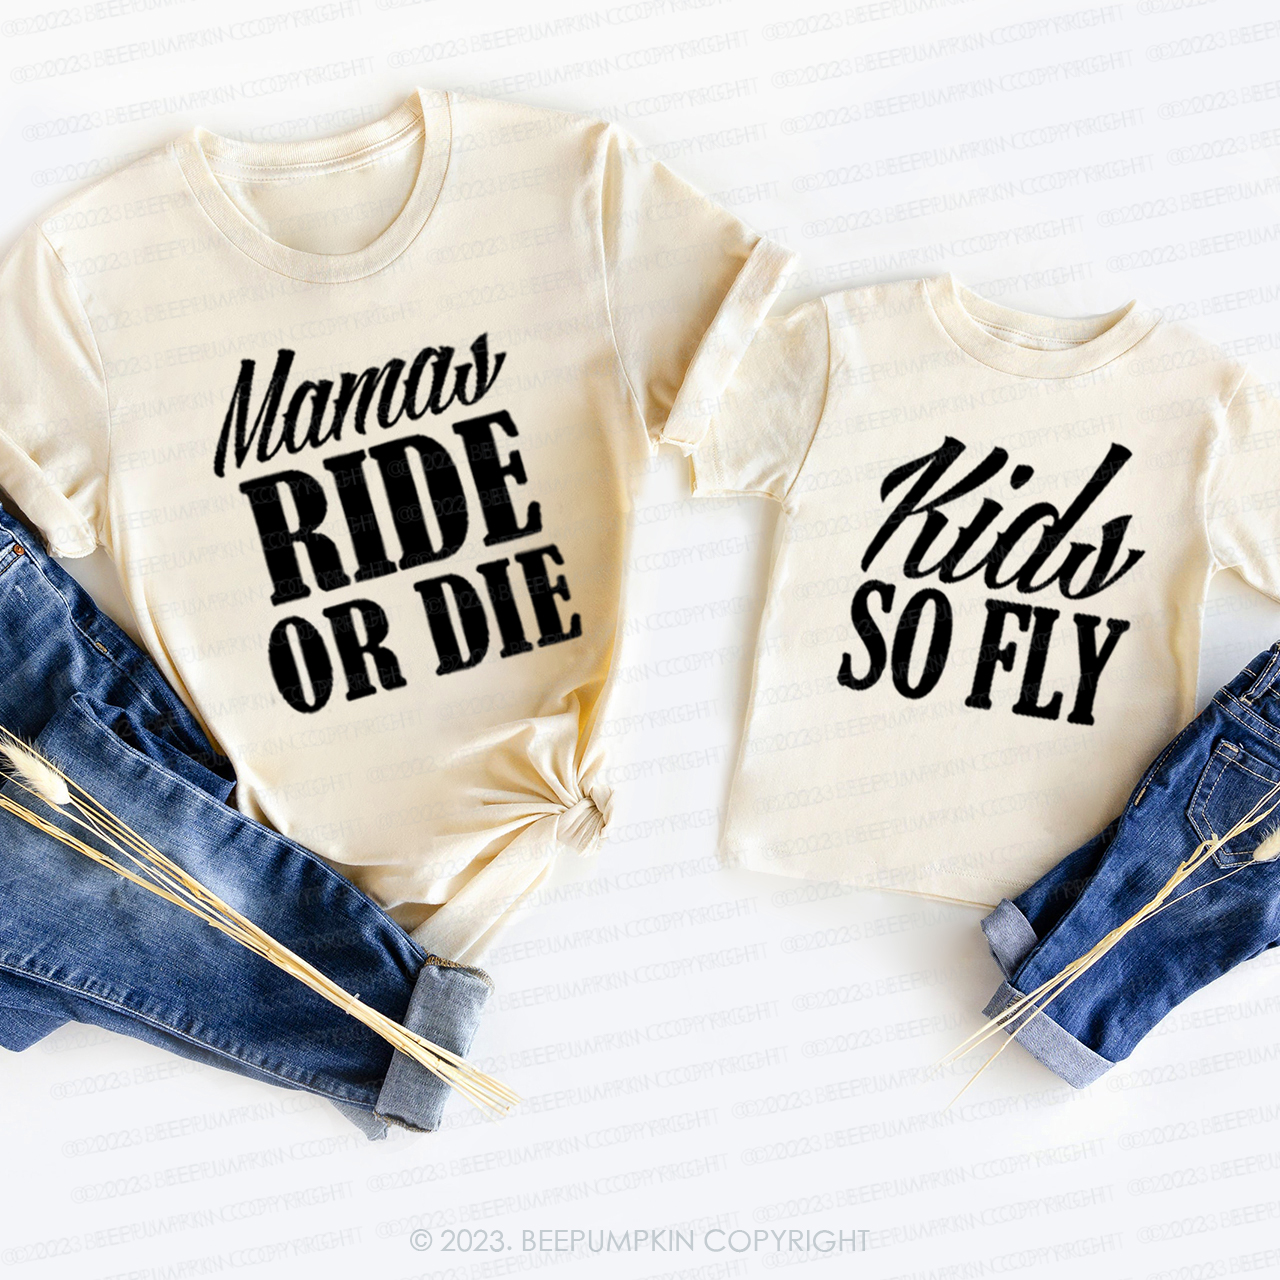 Kids So Fly Mama Ride Or Die T-Shirts For Mom&Me